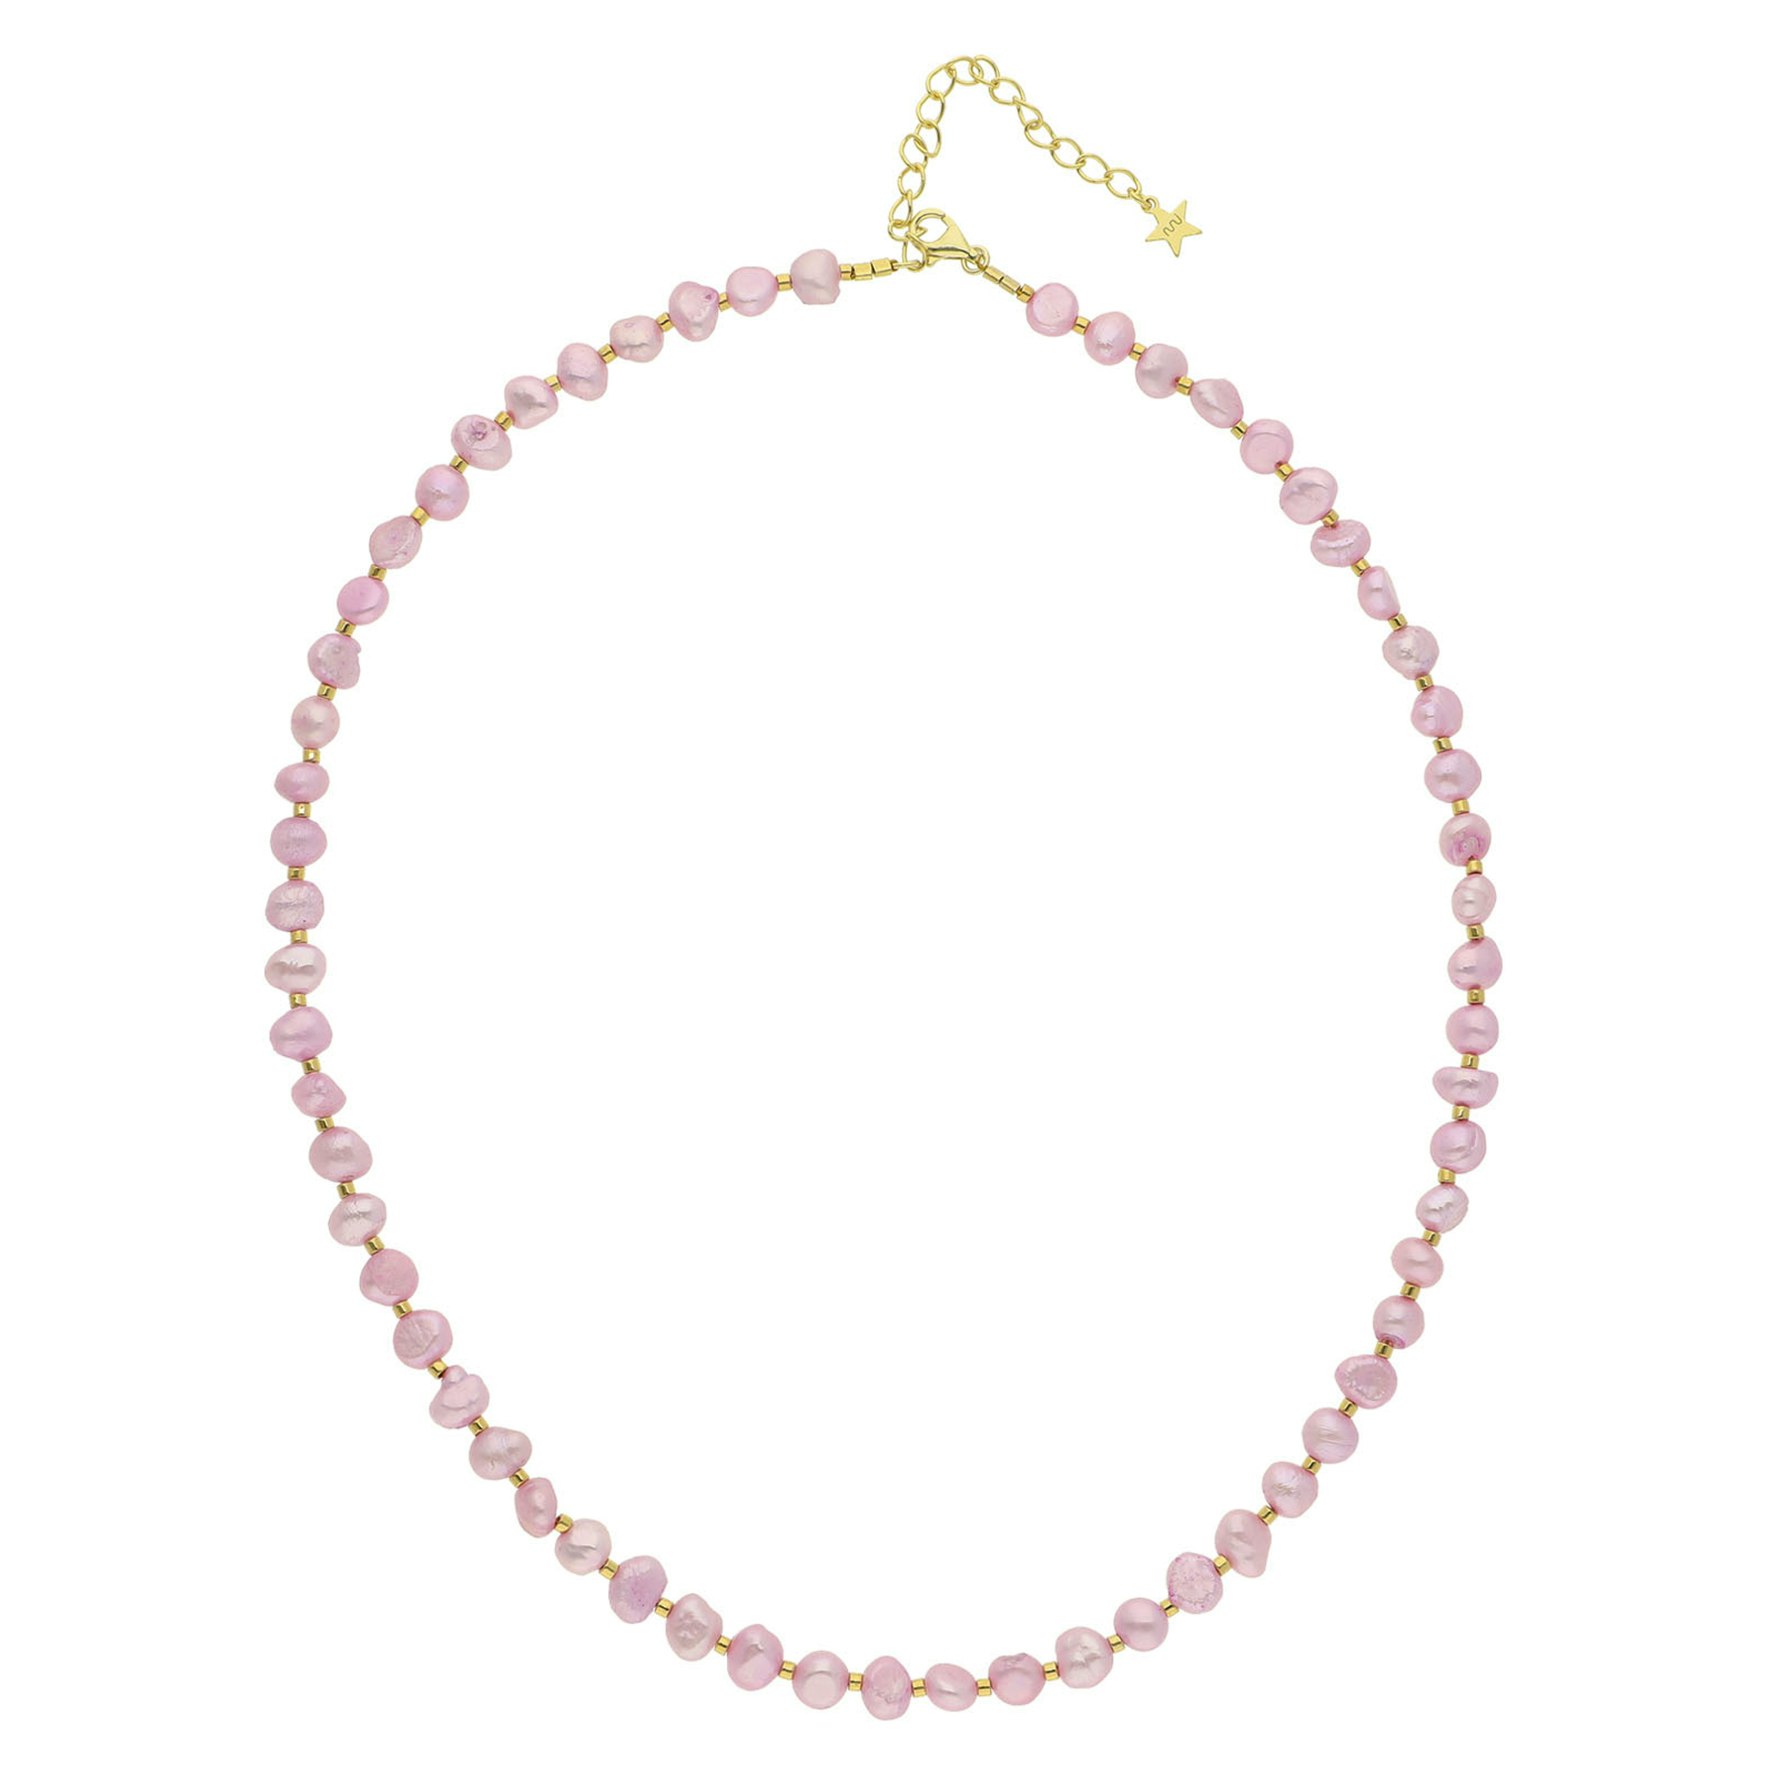 Ditte Light Pink Necklace from Nuni Copenhagen in Goldplated Silver Sterling 925